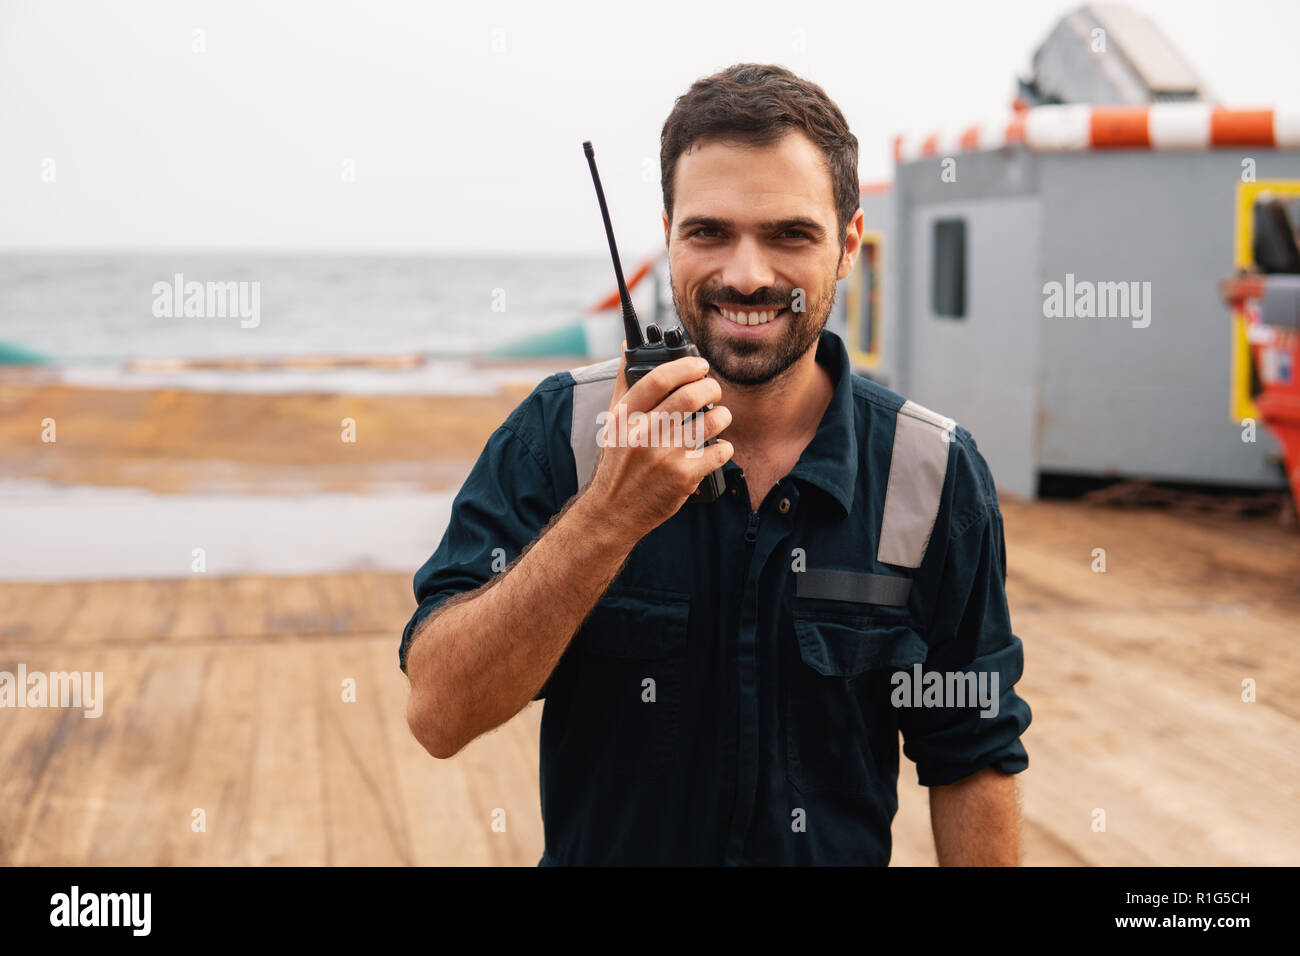 Marine Deck Officer or Chief mate on deck of vessel or ship Stock Photo